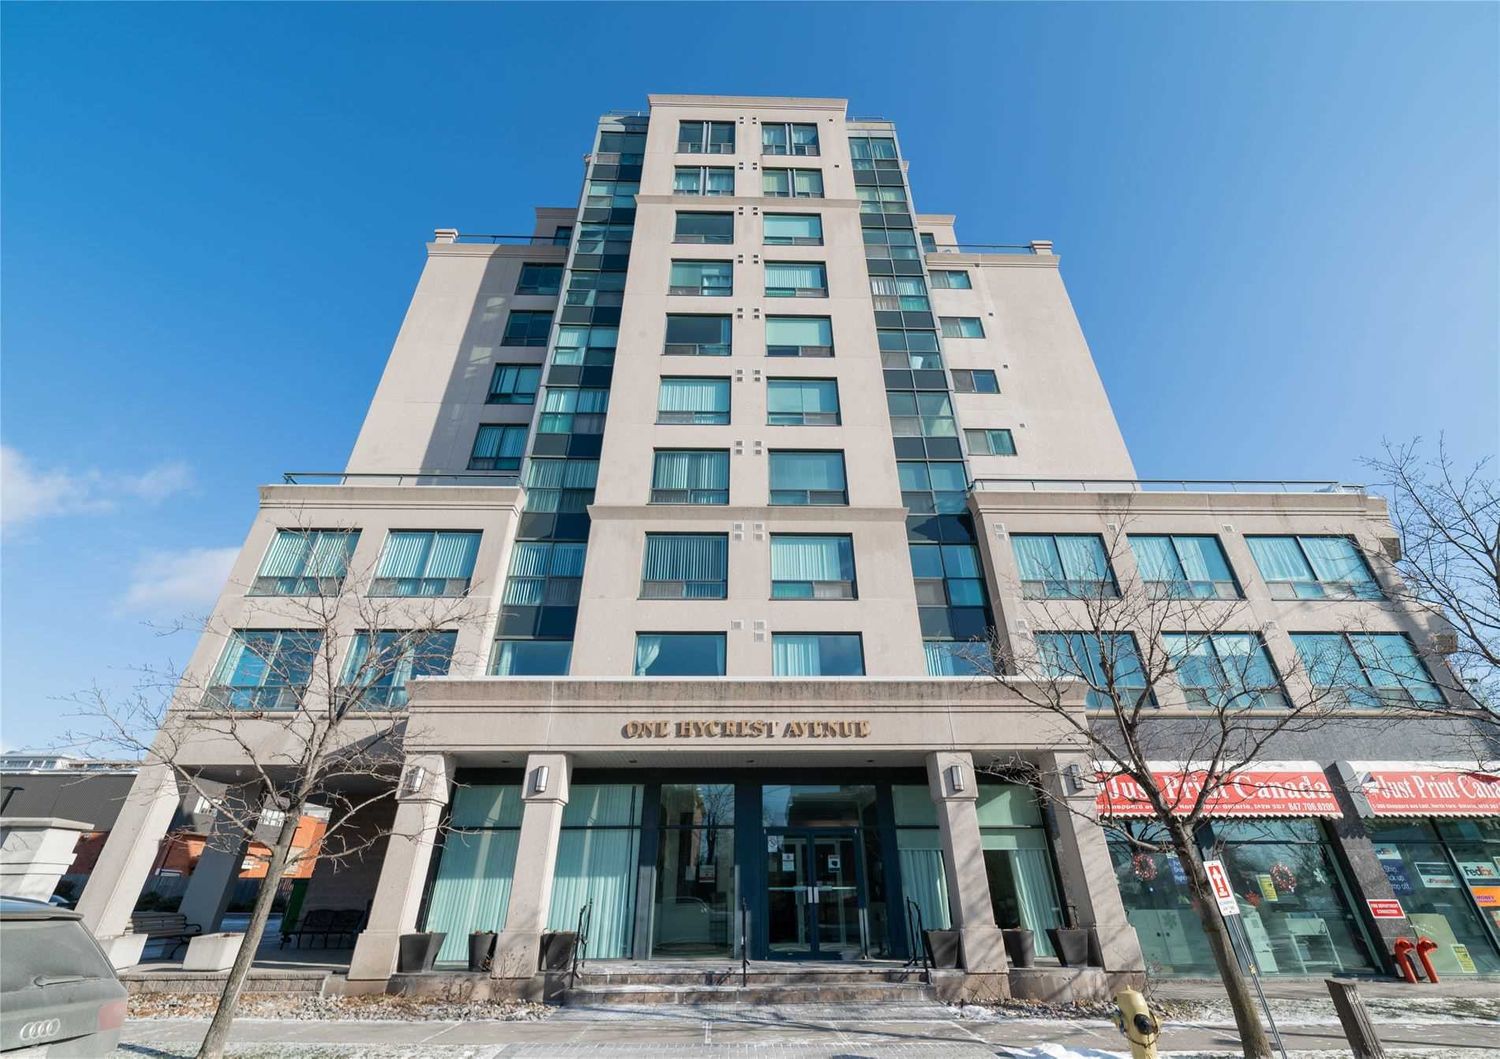 1 Hycrest Avenue. One Hycrest Avenue Condos is located in  North York, Toronto - image #2 of 2